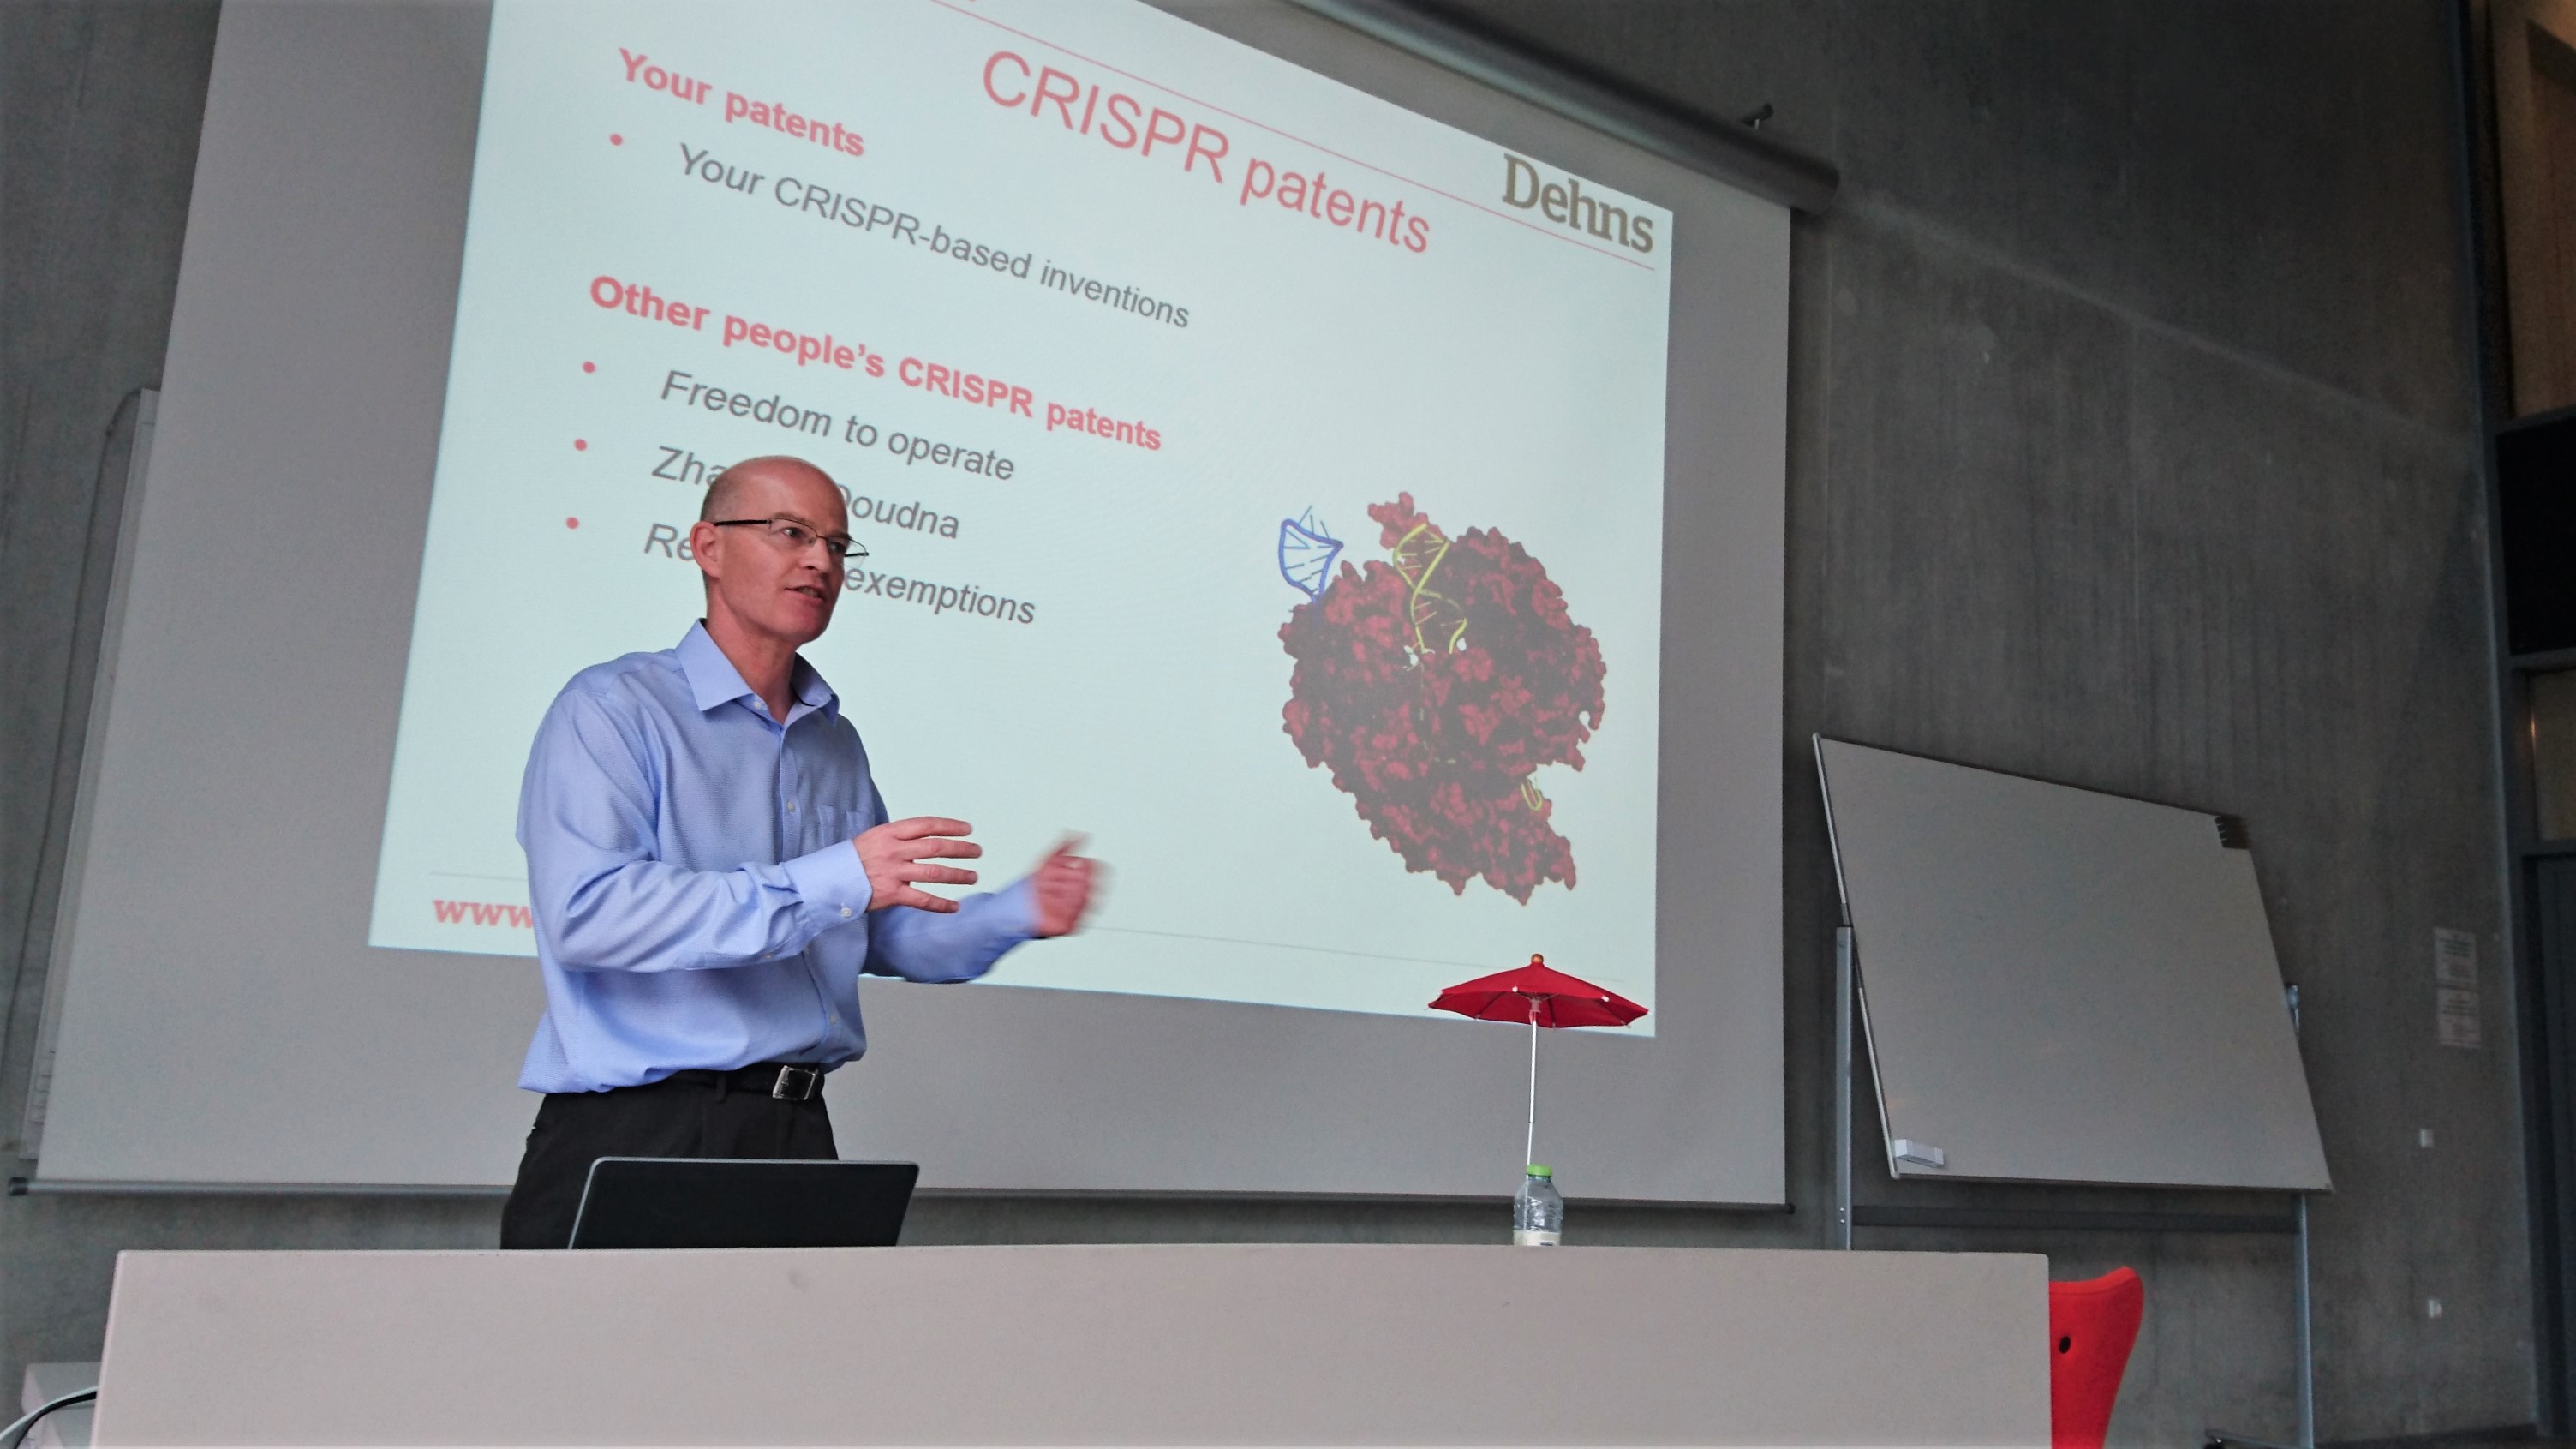 photo from MoMeD PhD course about CRISPR/Cas9 